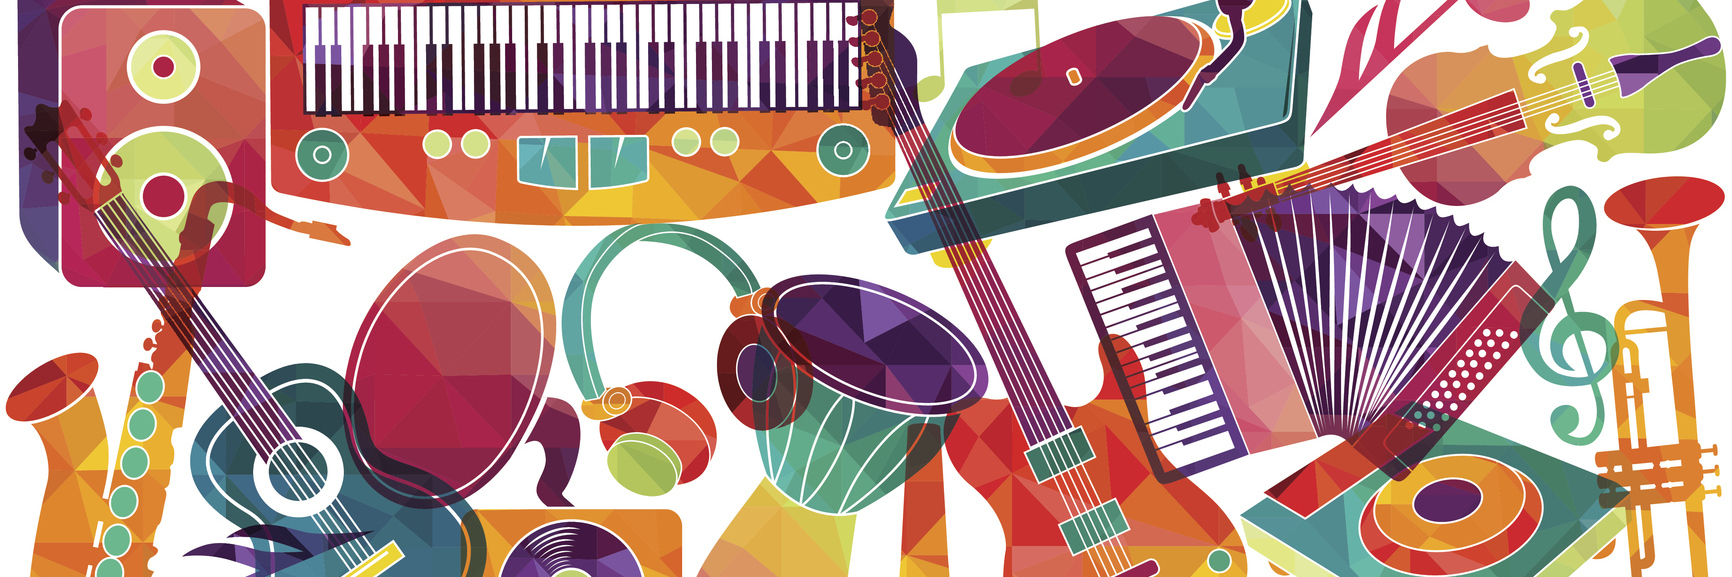 Drawing of colorful musical instruments including saxophone, guitar, accordion, piano.